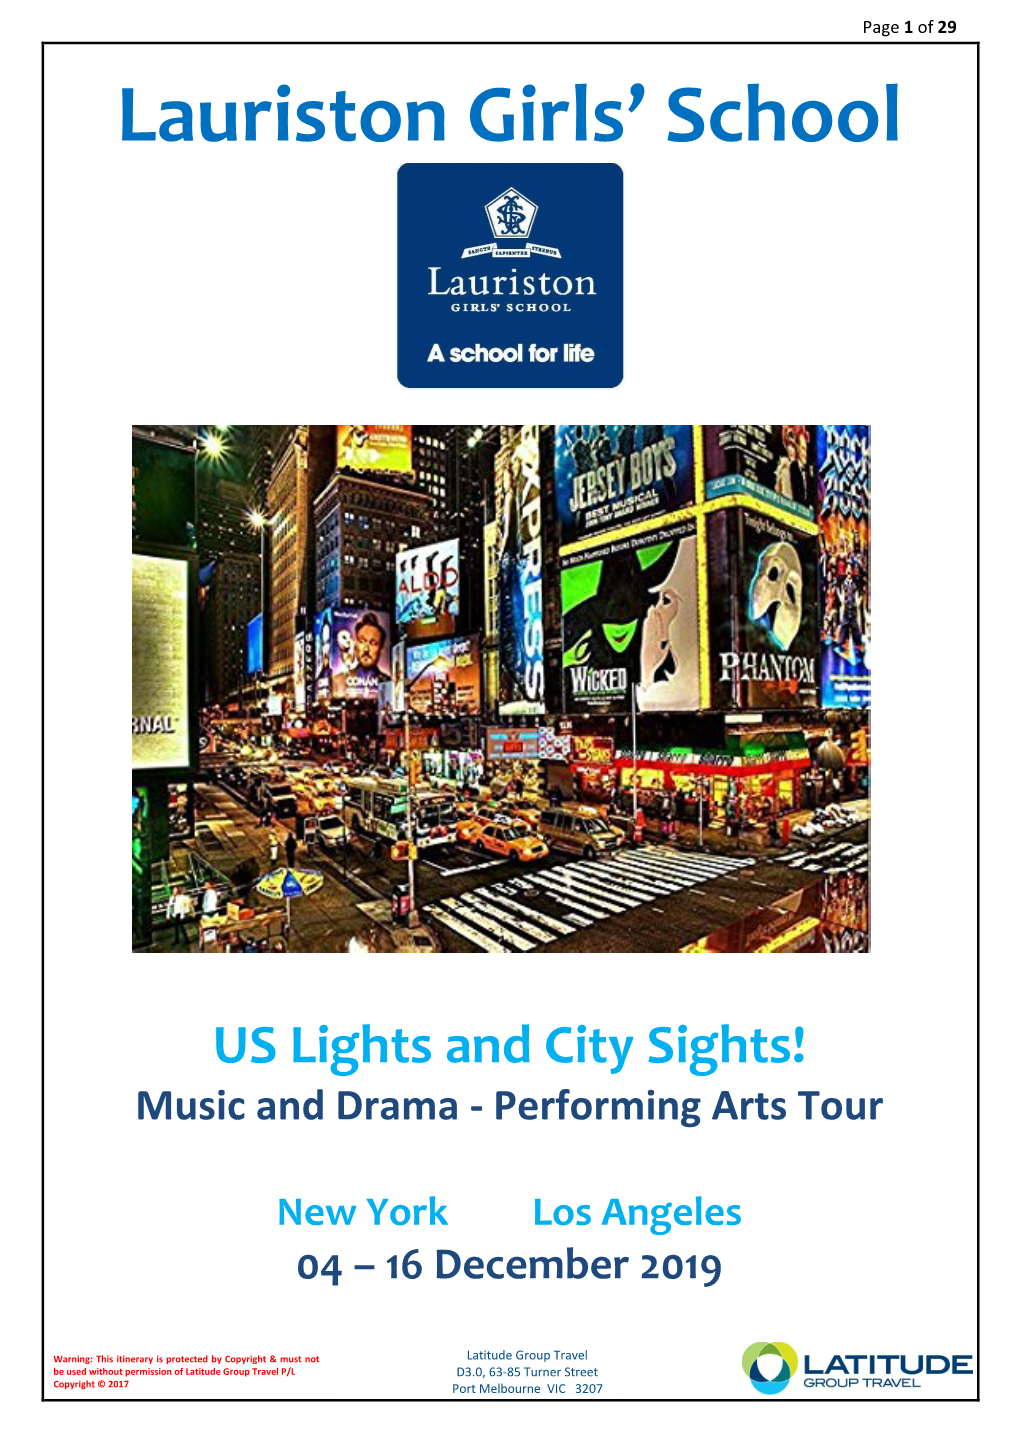 US Lights and City Sights! Music and Drama - Performing Arts Tour